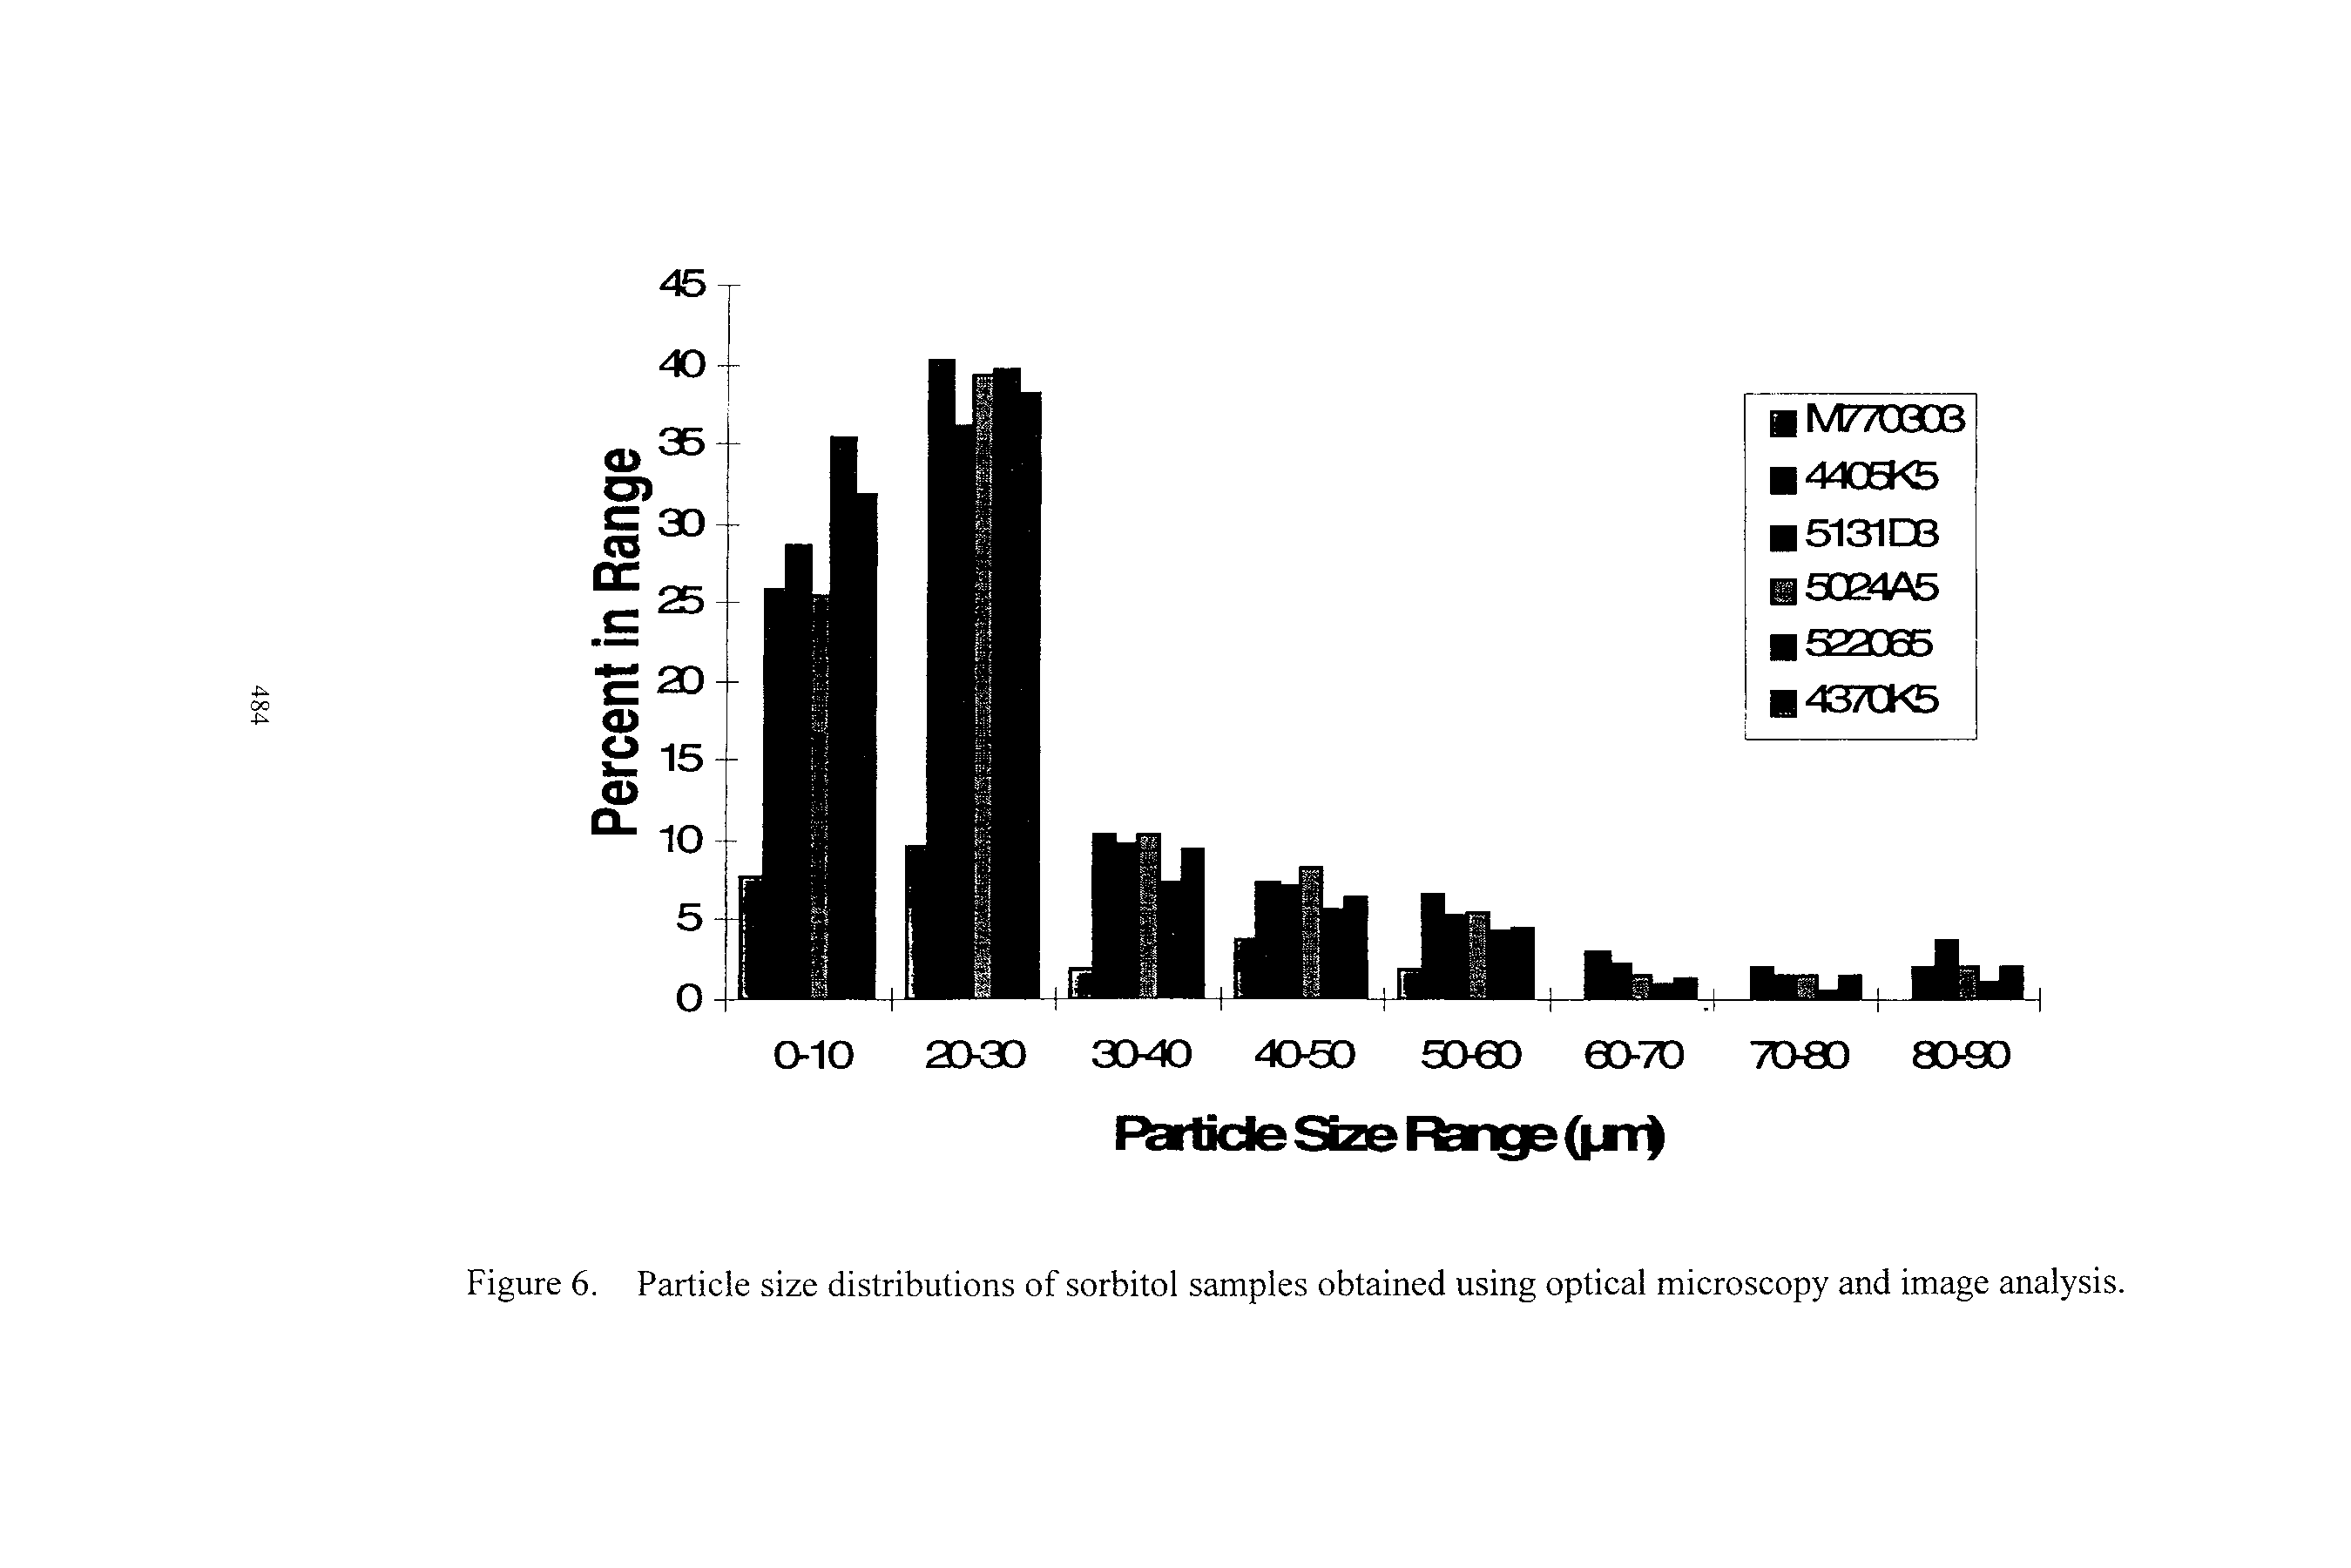 Figure 6. Particle size distributions of sorbitol samples obtained using optical microscopy and image analysis.